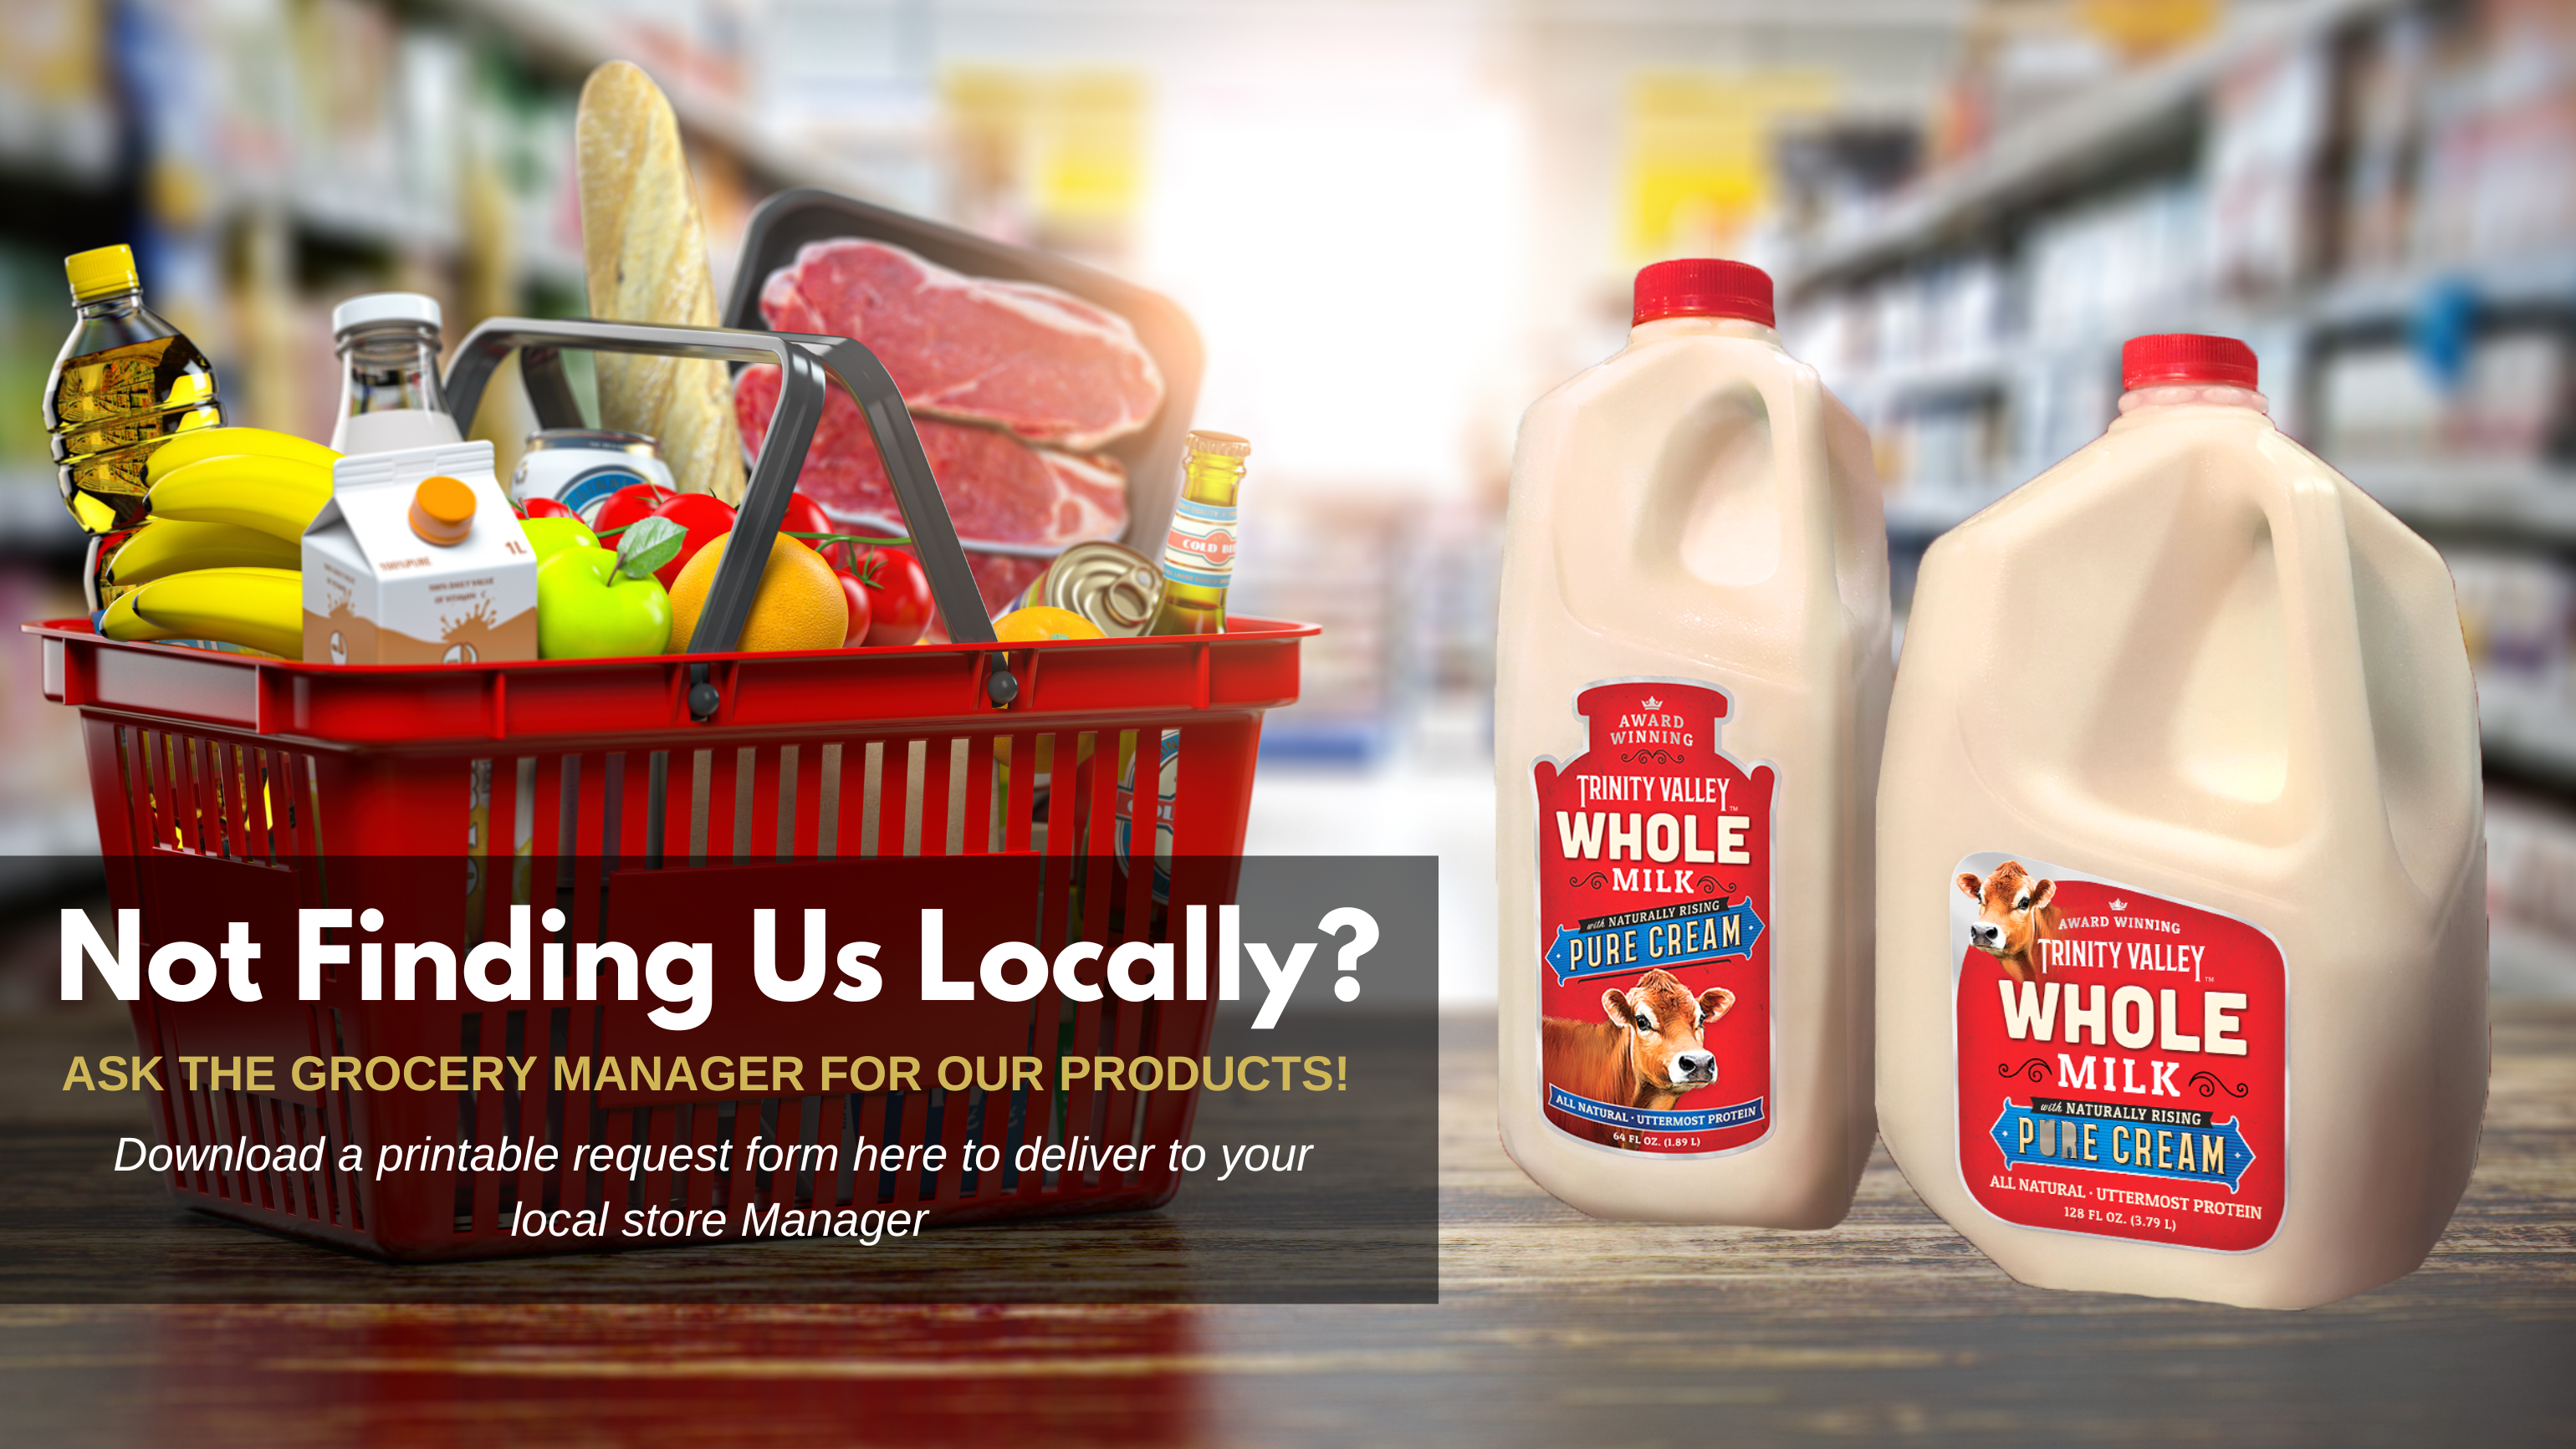 Not Finding Us In Your Local Store?  Download this attachment and give it to our local grocer!